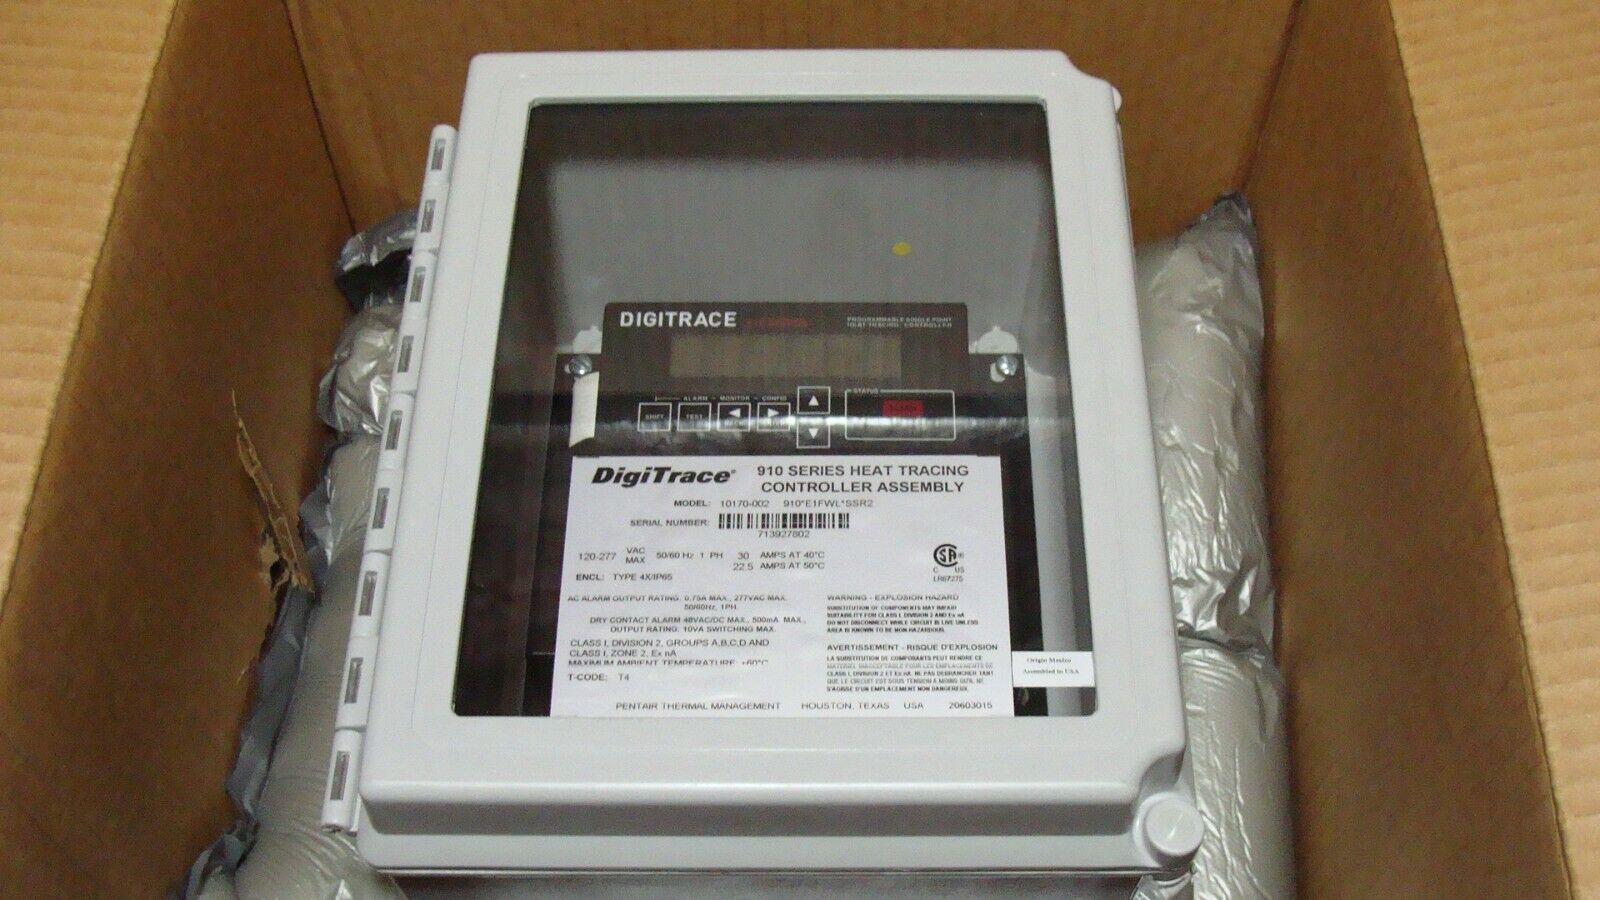 New  Nvent Raychem 910 Series Heat Tracing Controller Assembly 10170-002 120-277